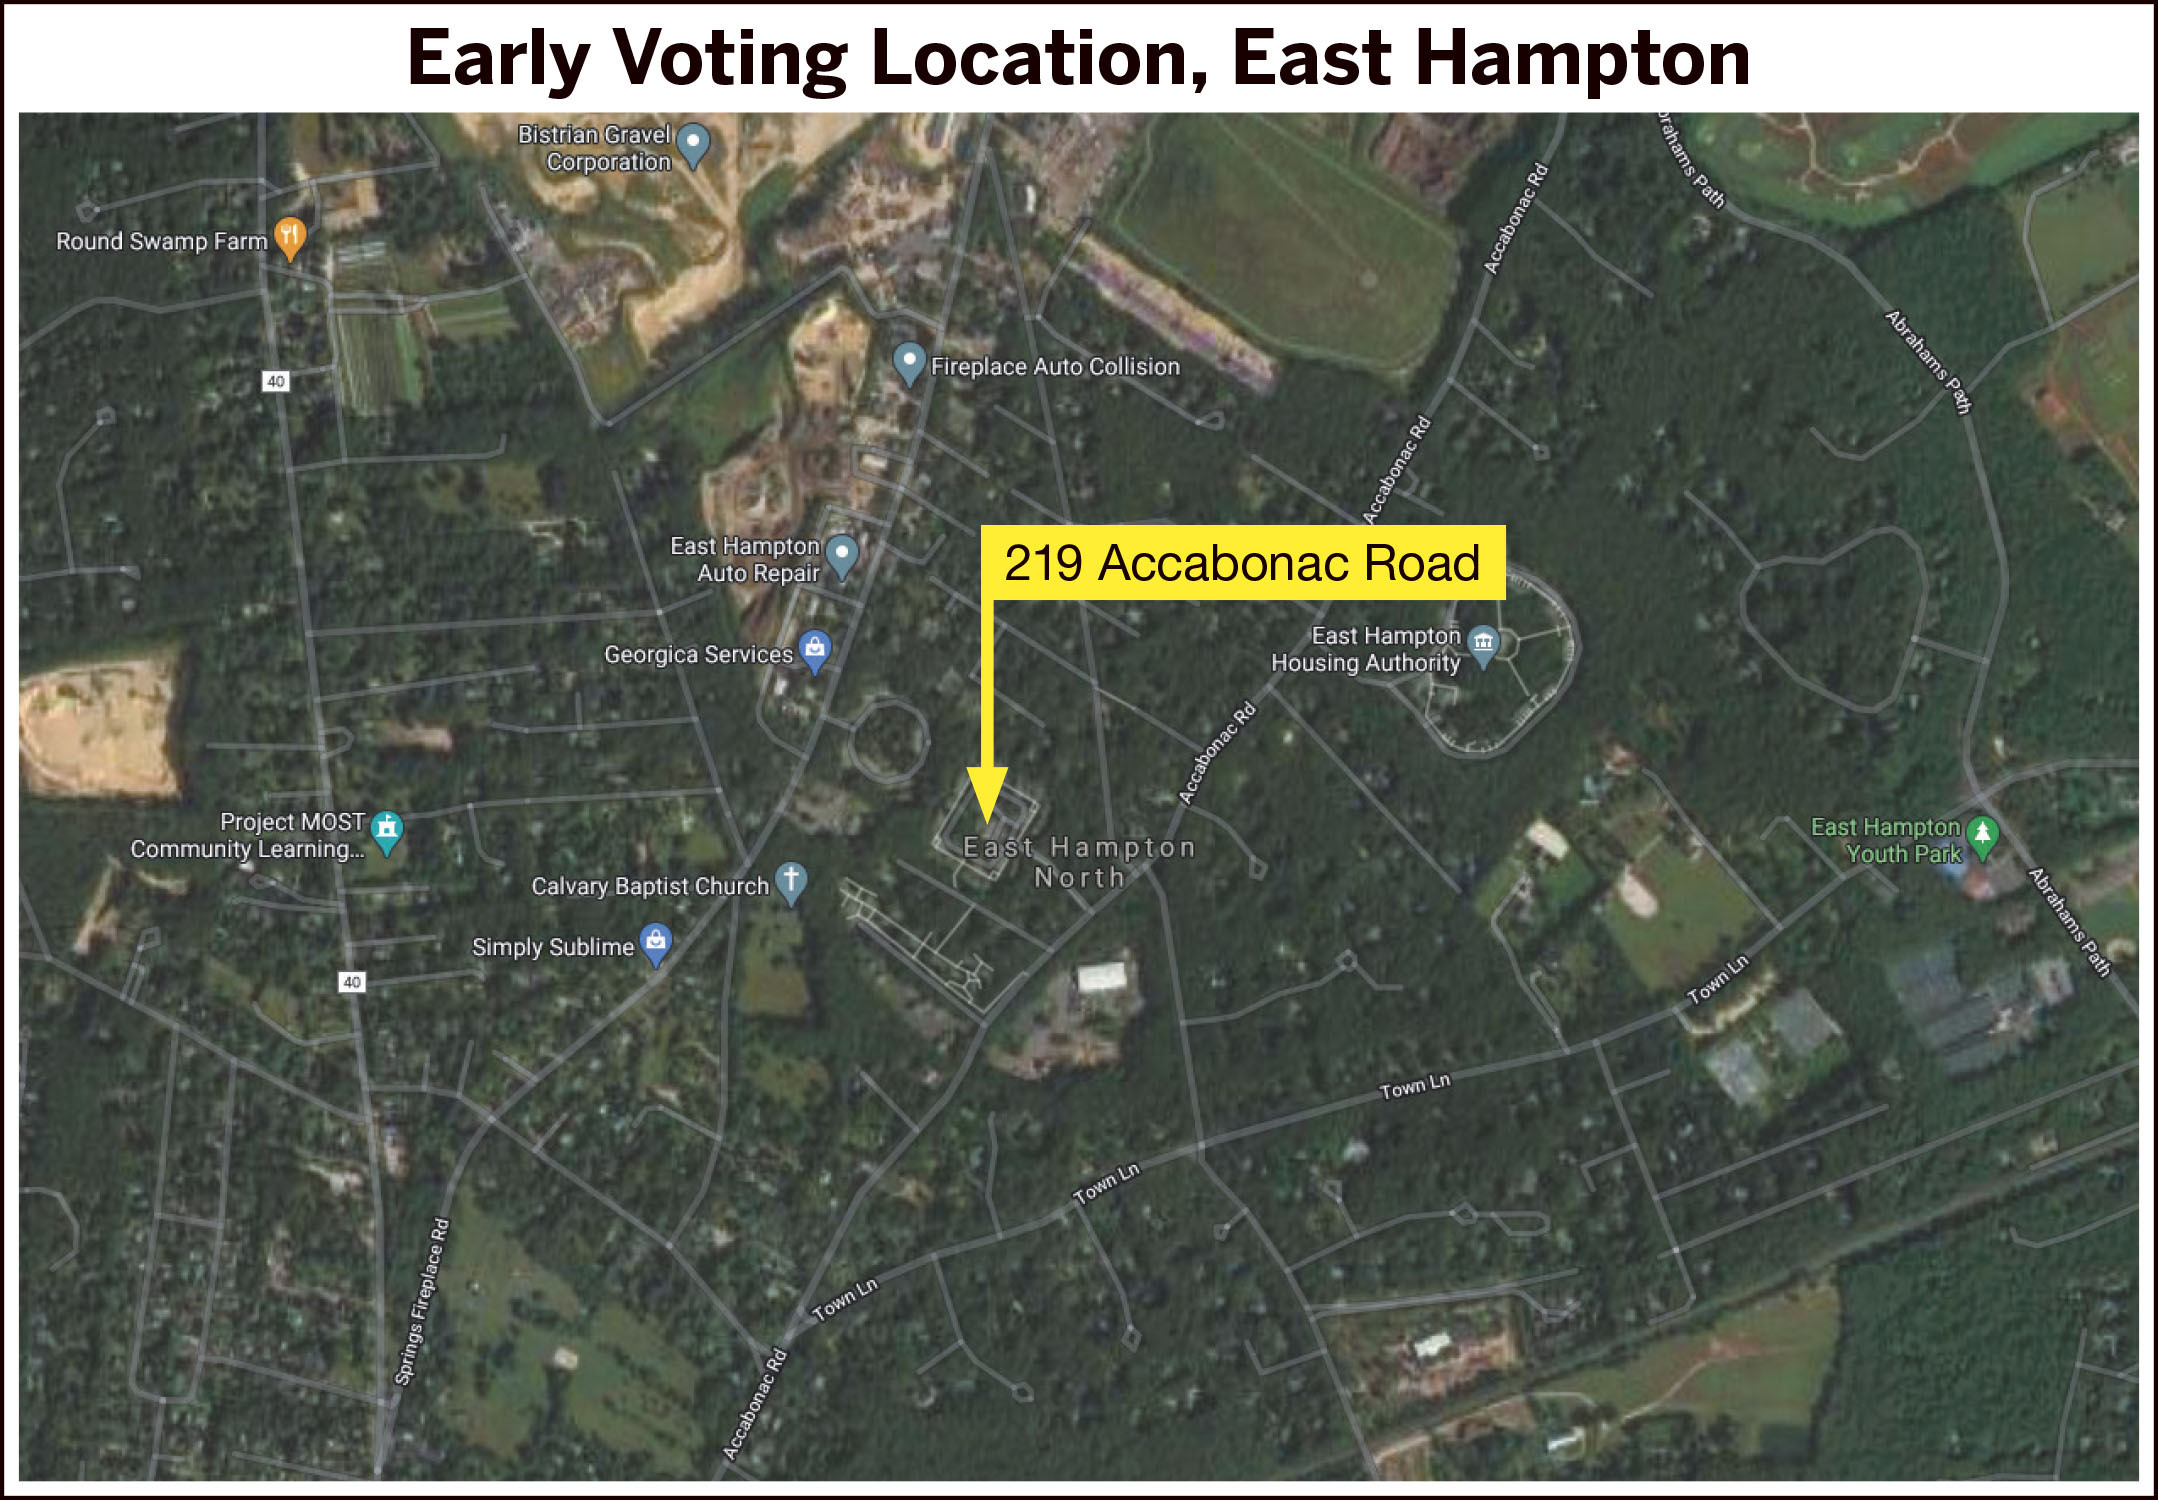 The early voting location in East Hampton is at 219 Accabonac Road at Windmill Village.